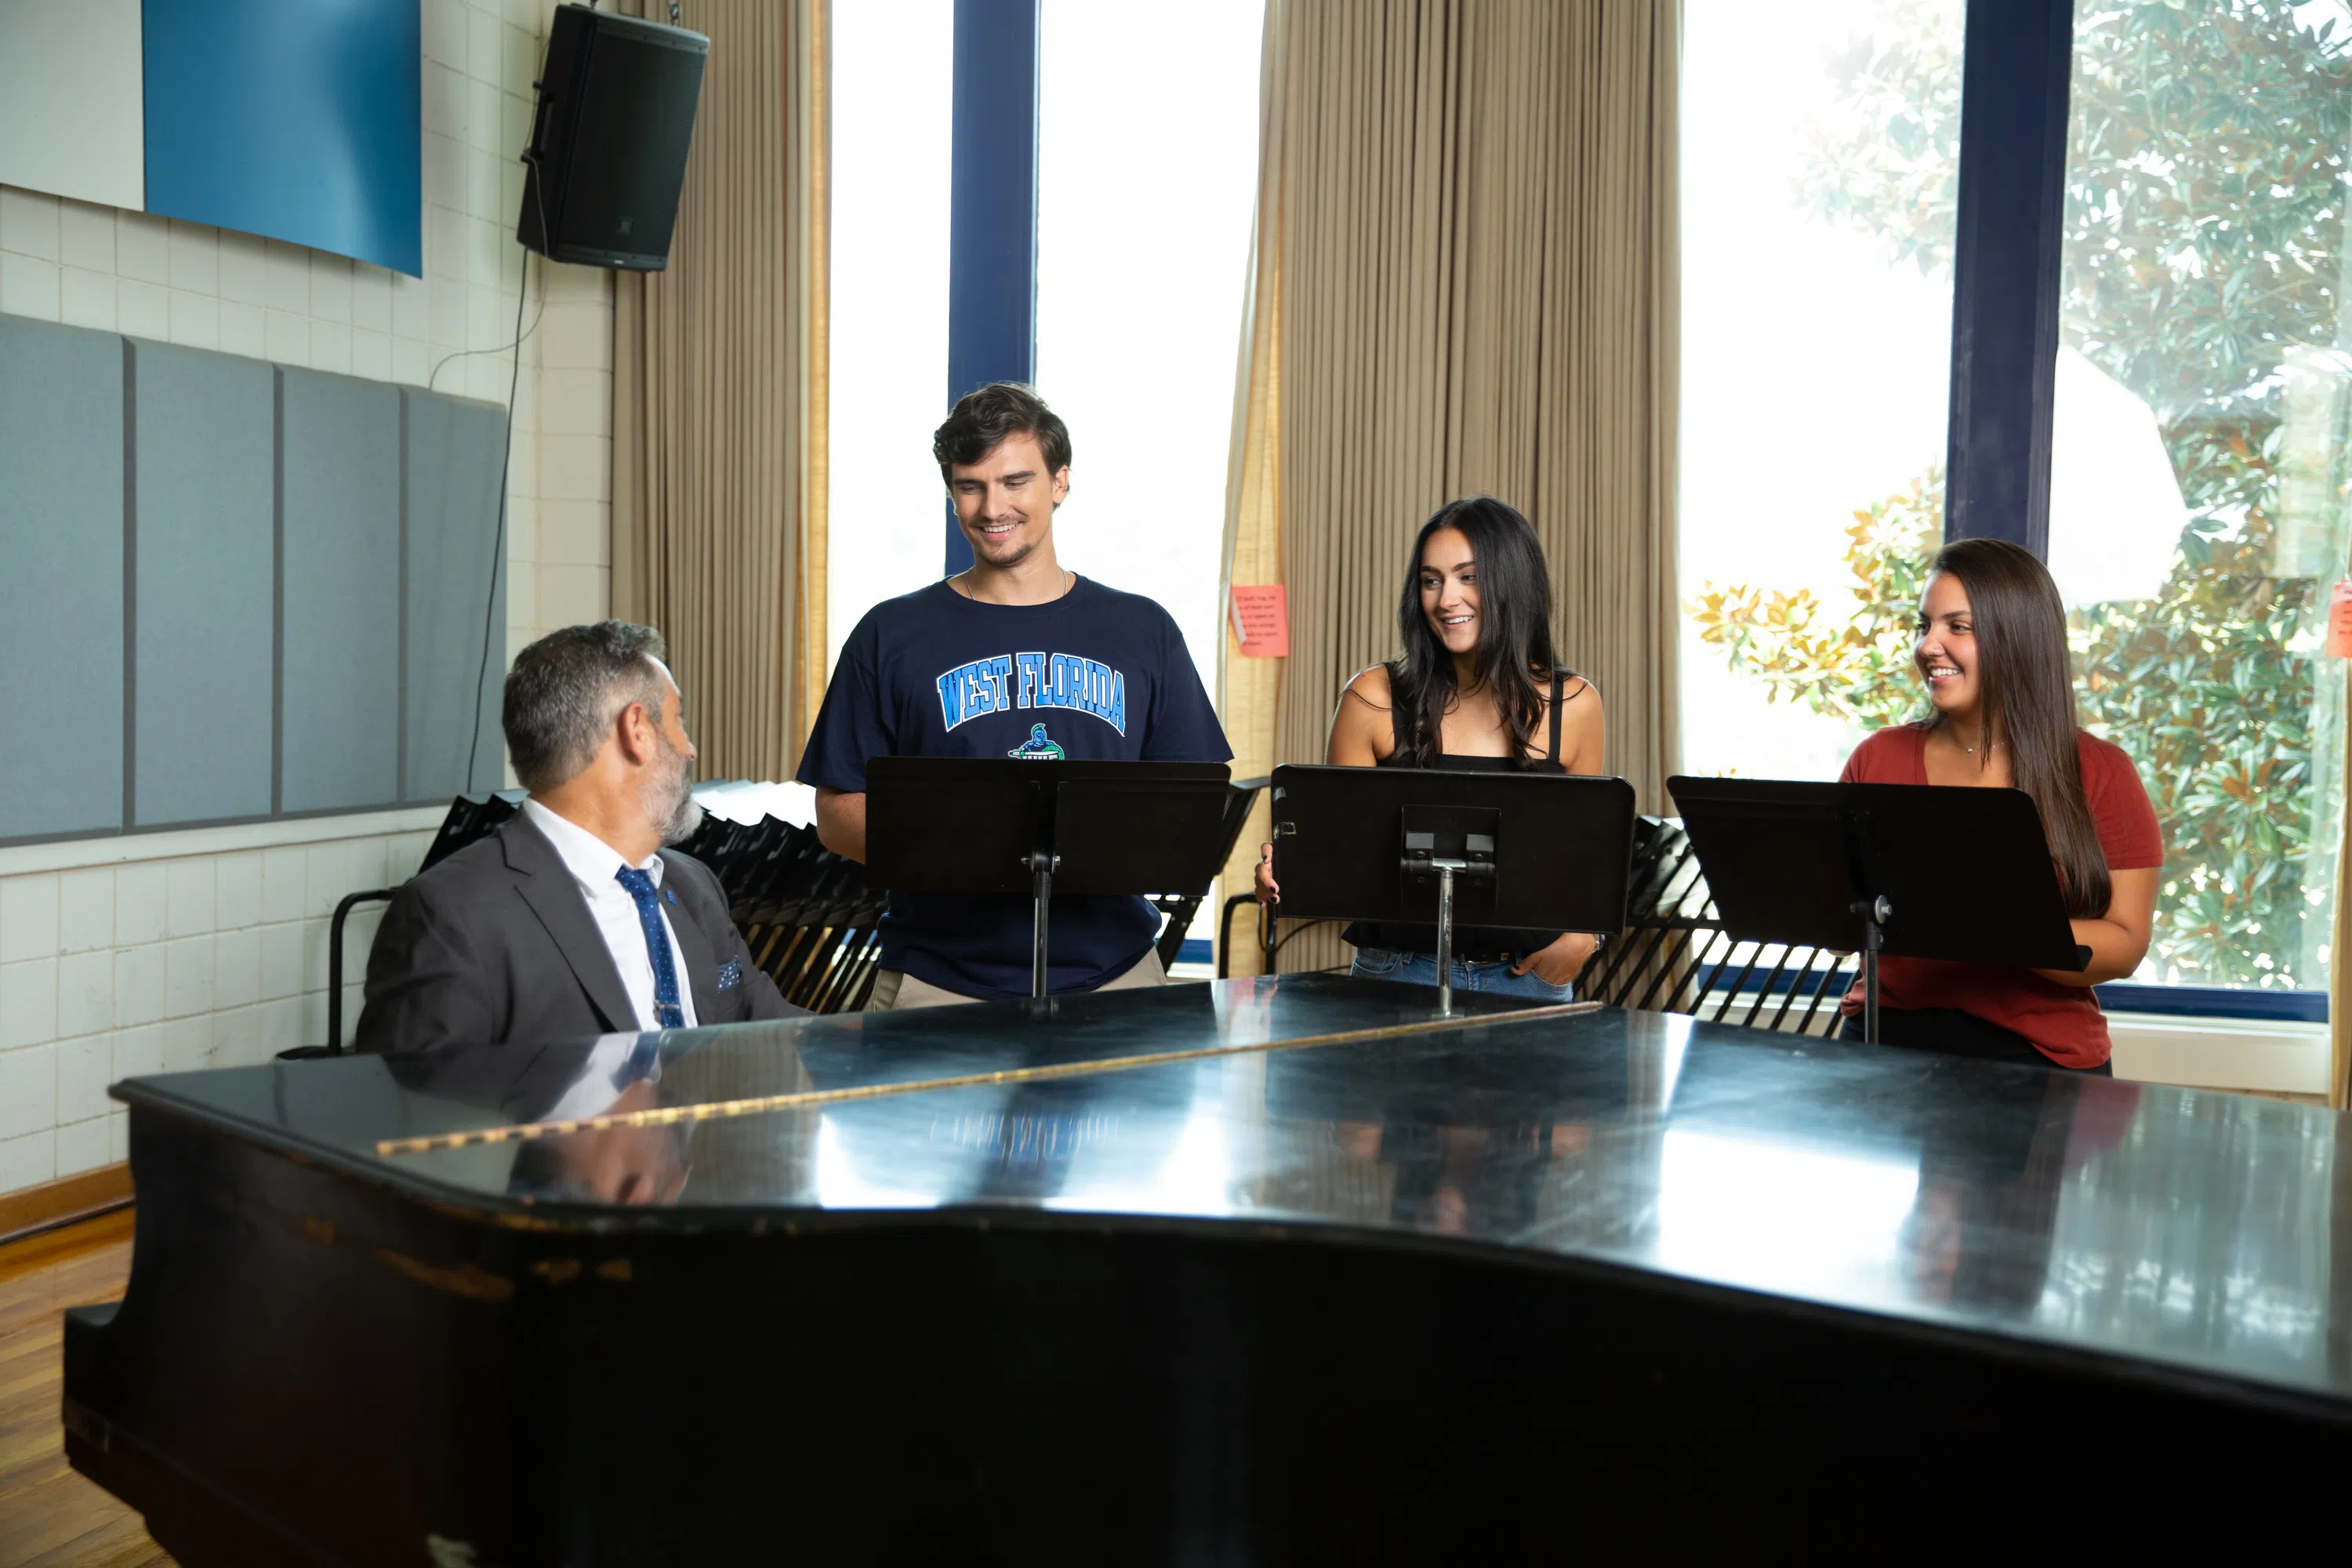 Students singing along side a grand piano